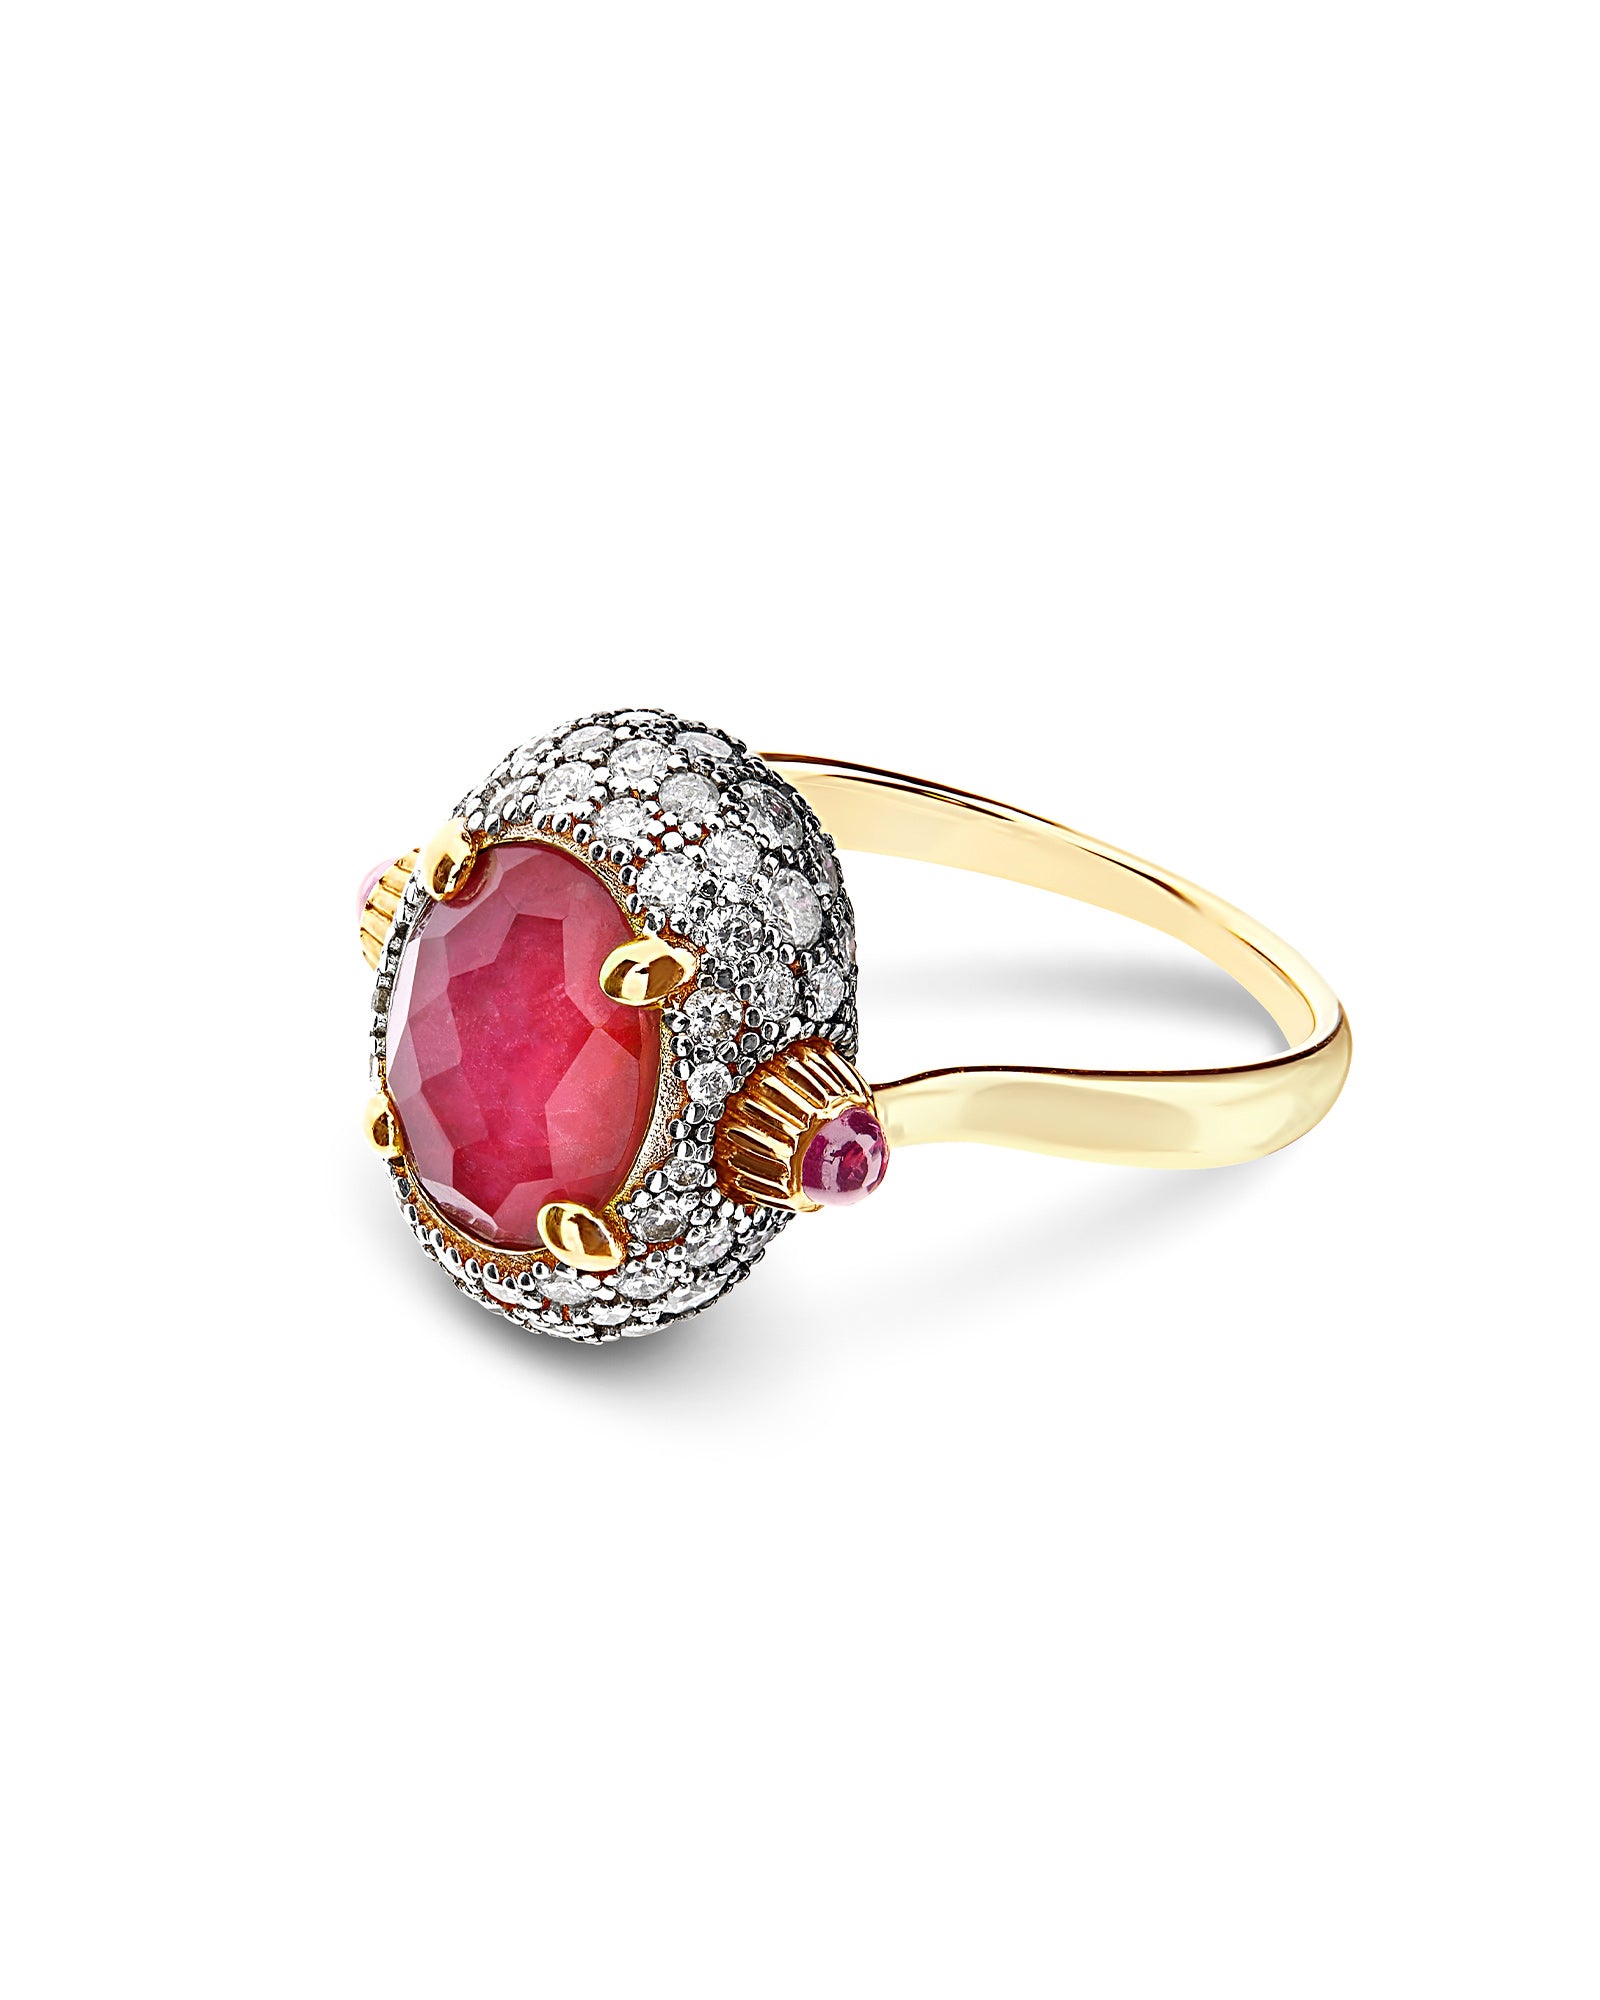 "Reverse" Gold, Diamonds, Rubies and Rock Crystal Double-face ring (MEDIUM)